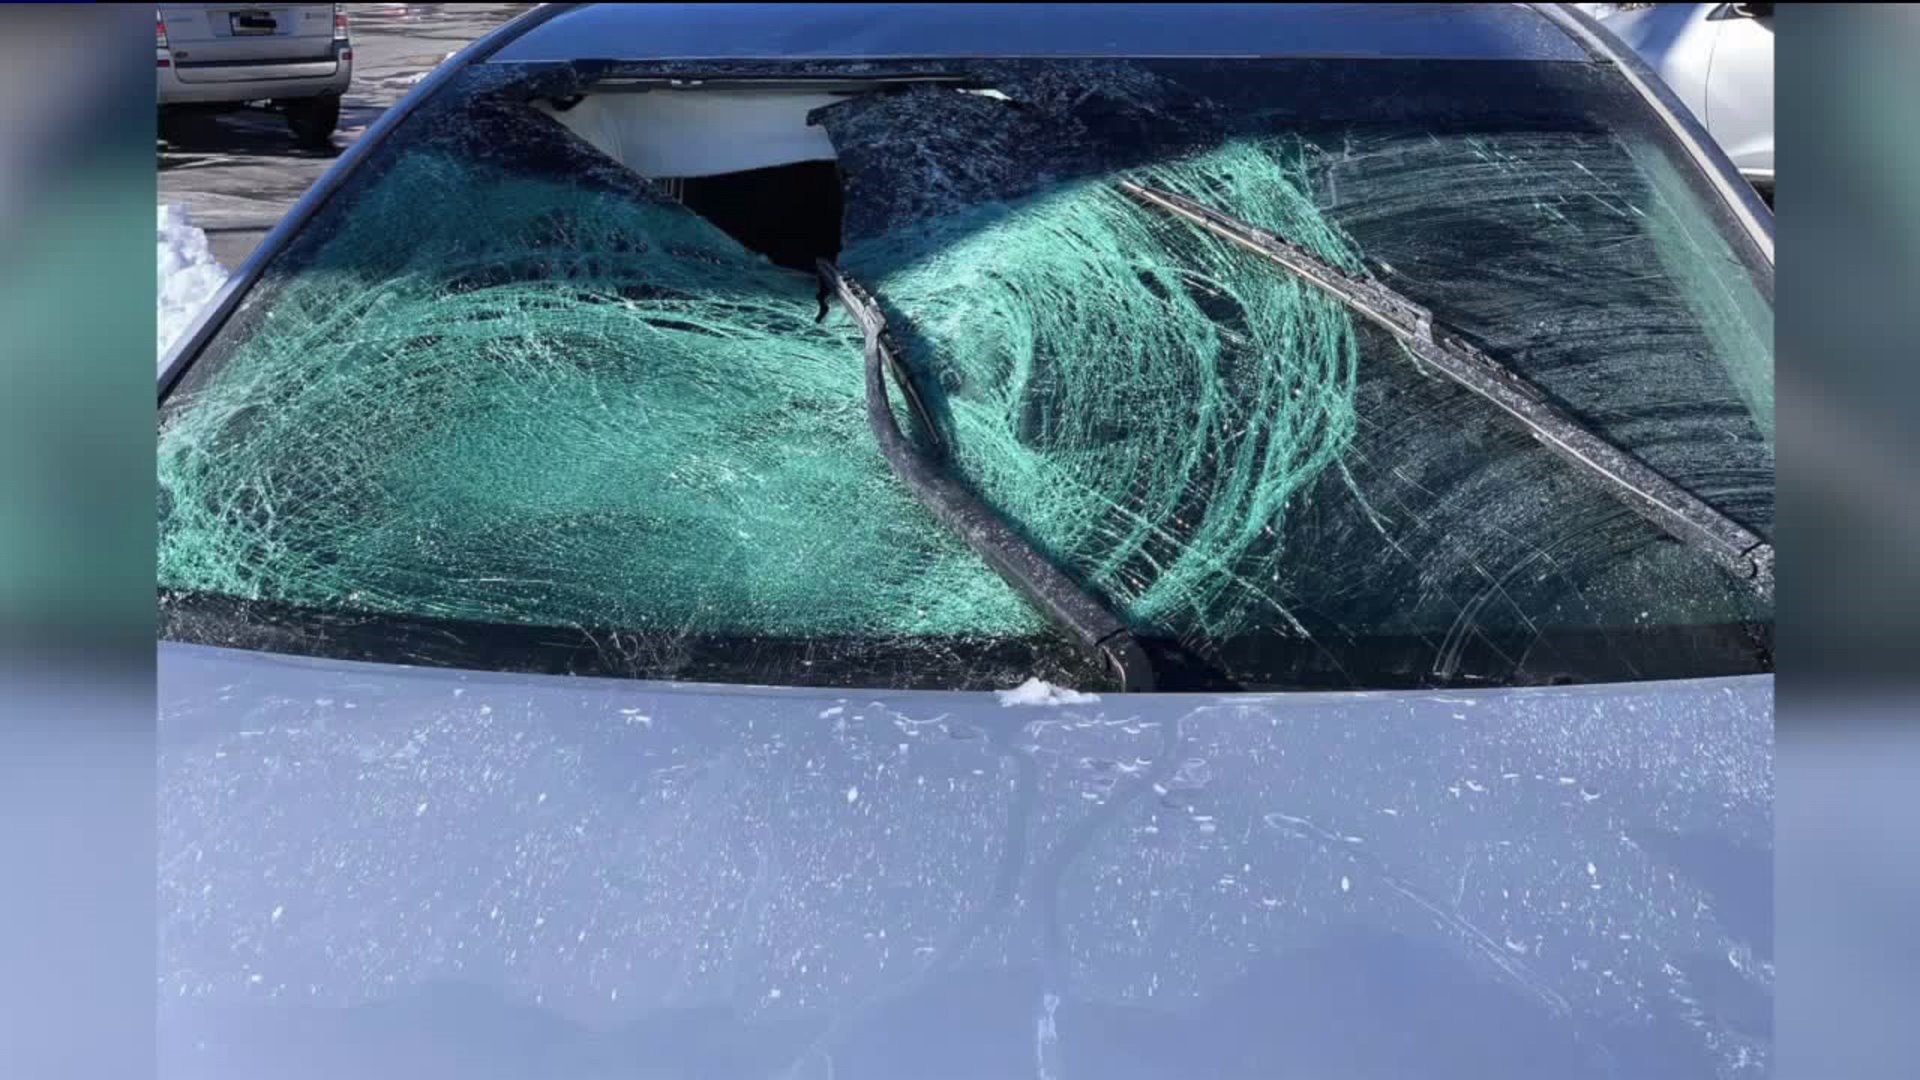 Ice from Rig Damages Car, Injures Passenger